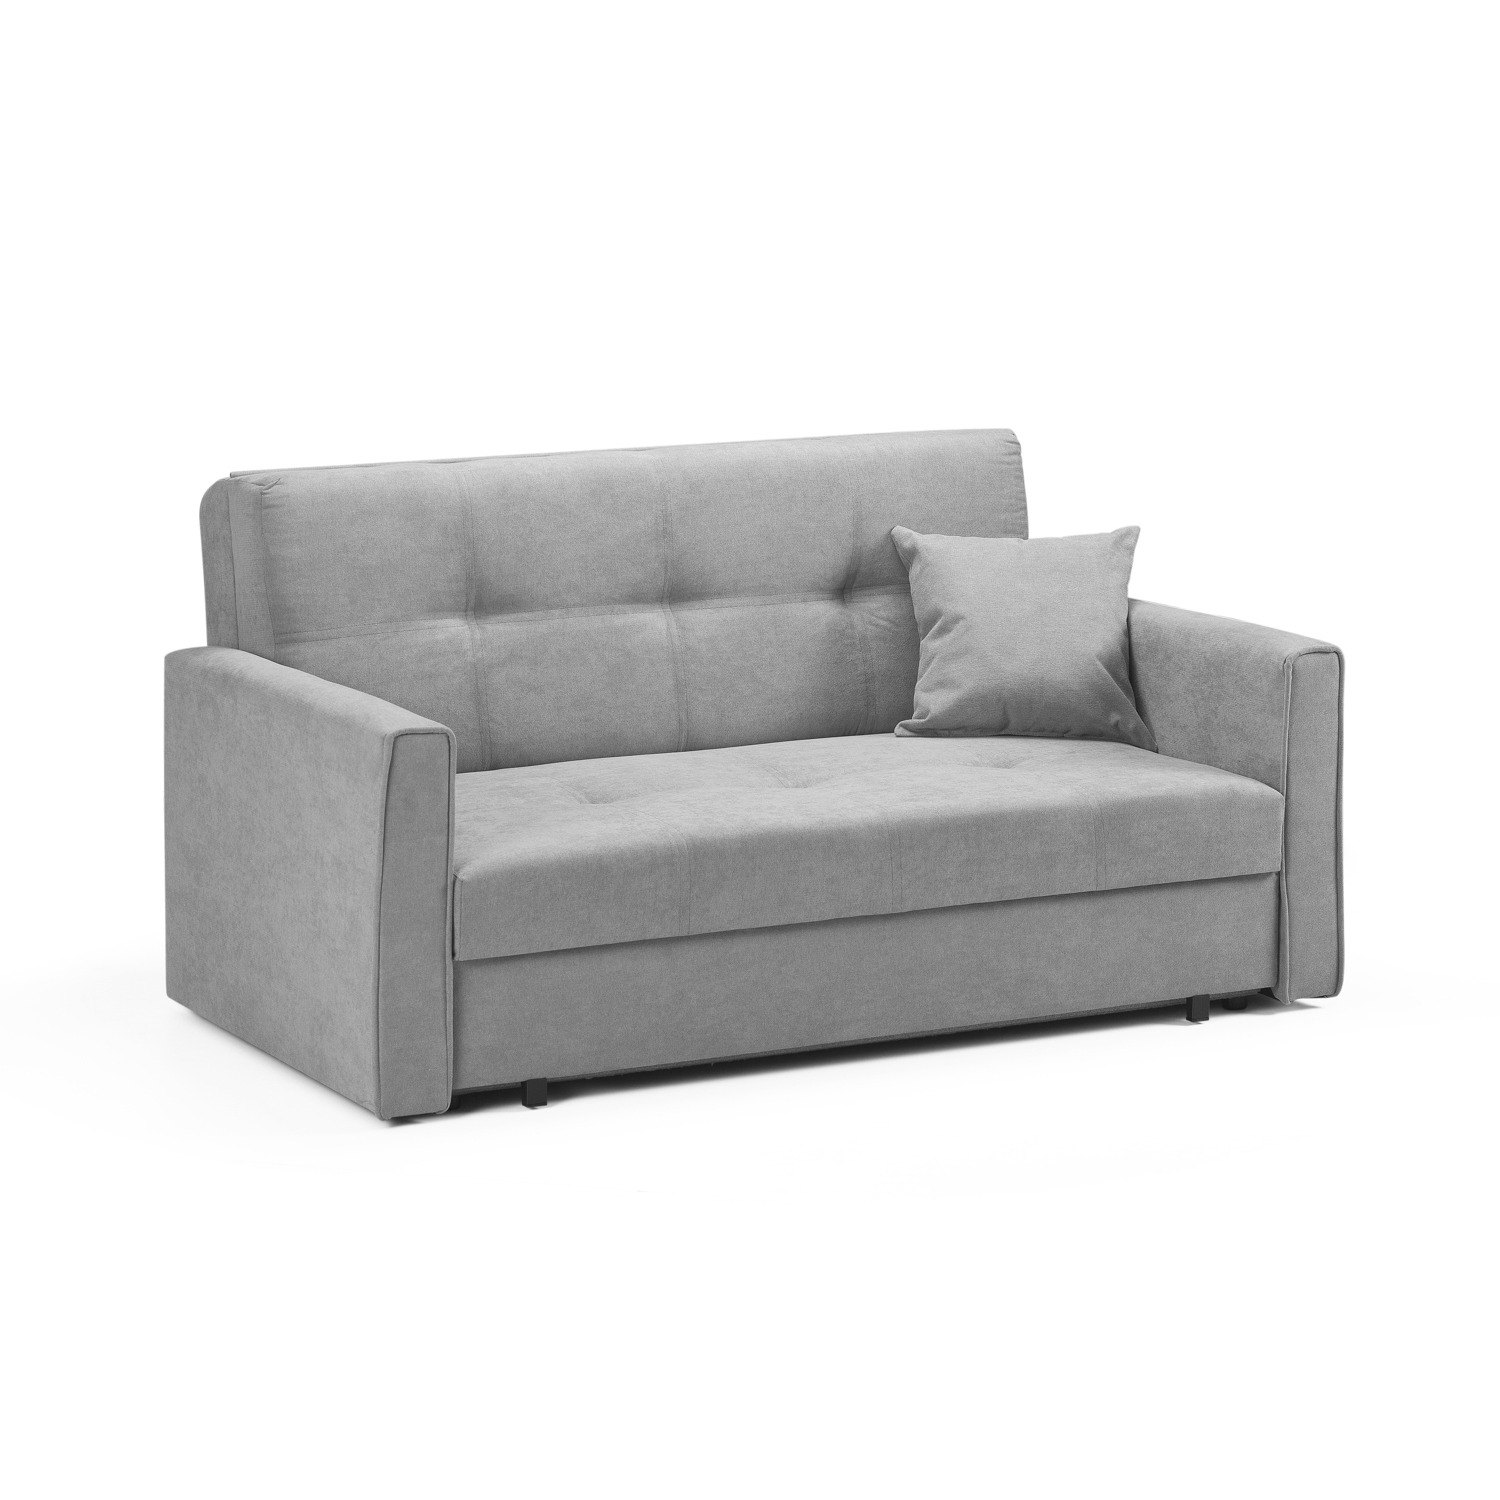 Viva Sofabed Grey 2 Seater - image 1